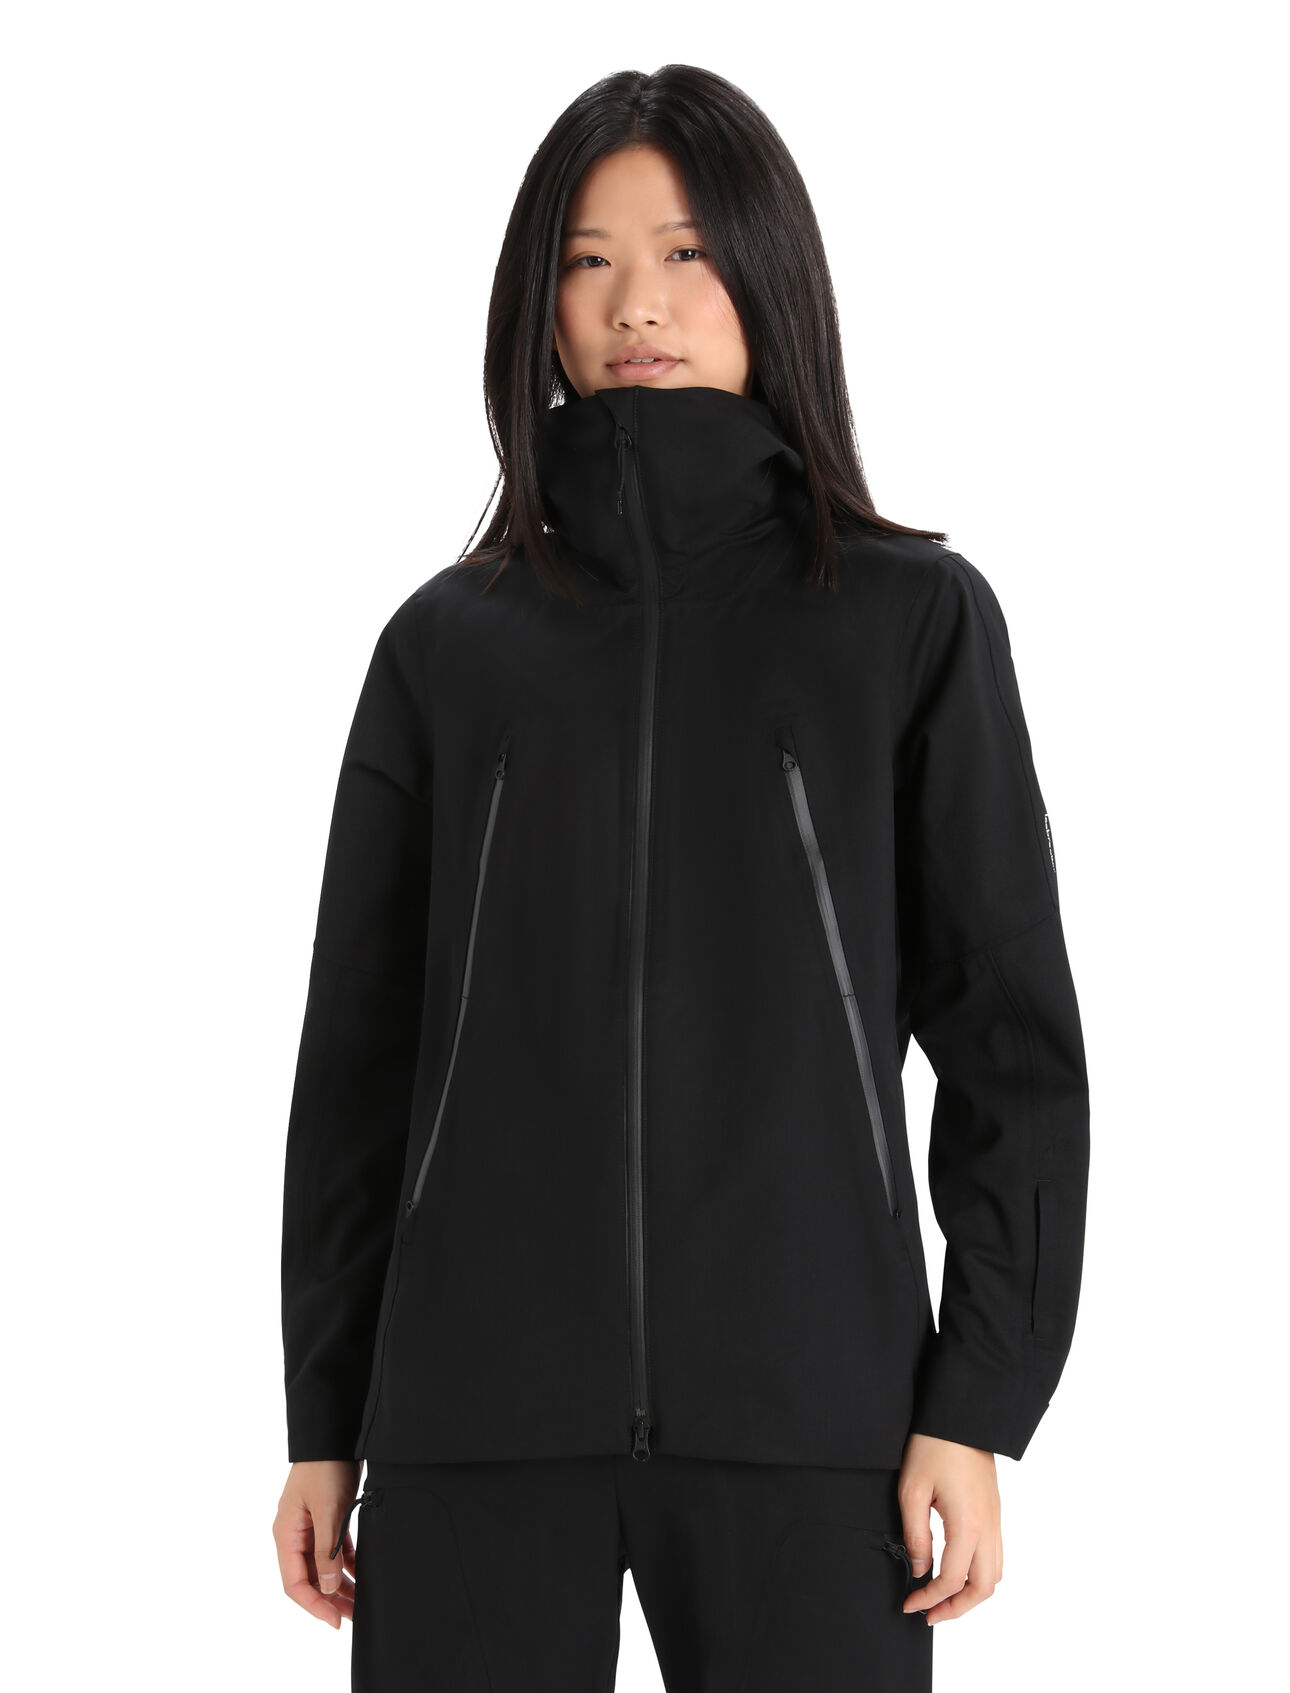 Womens Shell+™ Merino Hooded Jacket An ultra-versatile, highly weather resistant shell jacket made with 100% pure merino wool, the Shell+™ Hooded Jacket features a durable, PFC-free water-repellent finish to keep you warm and dry in changing conditions.